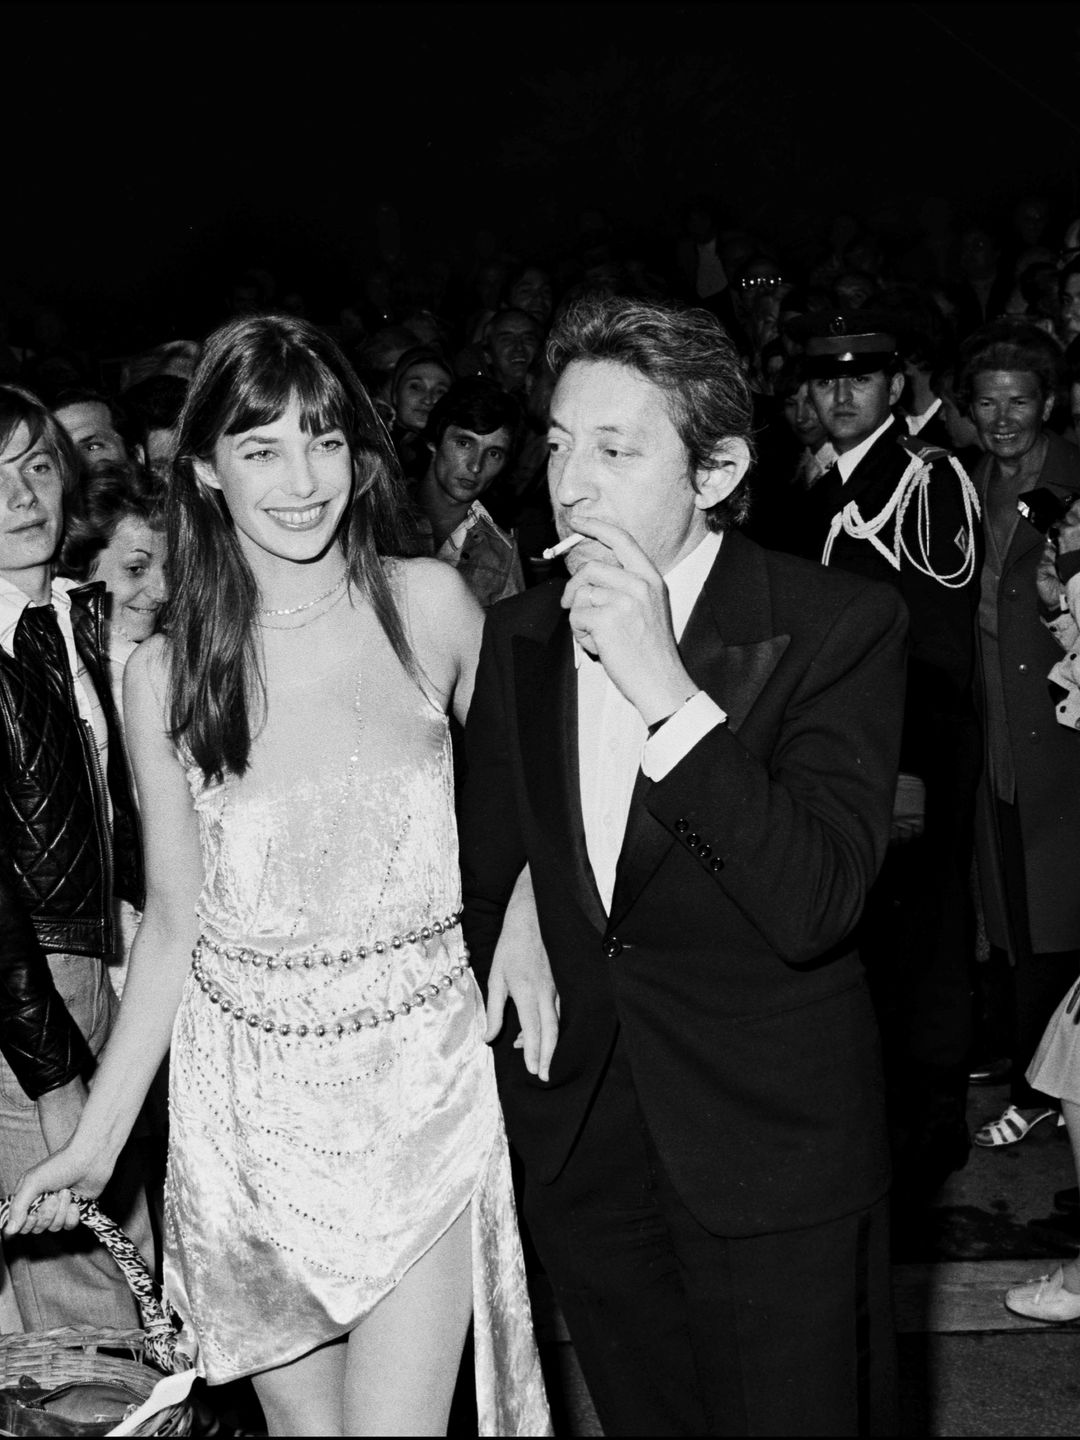 Jane Birkin holding a basket with Serge Gainsbourg at a Cannes Film Festival party 